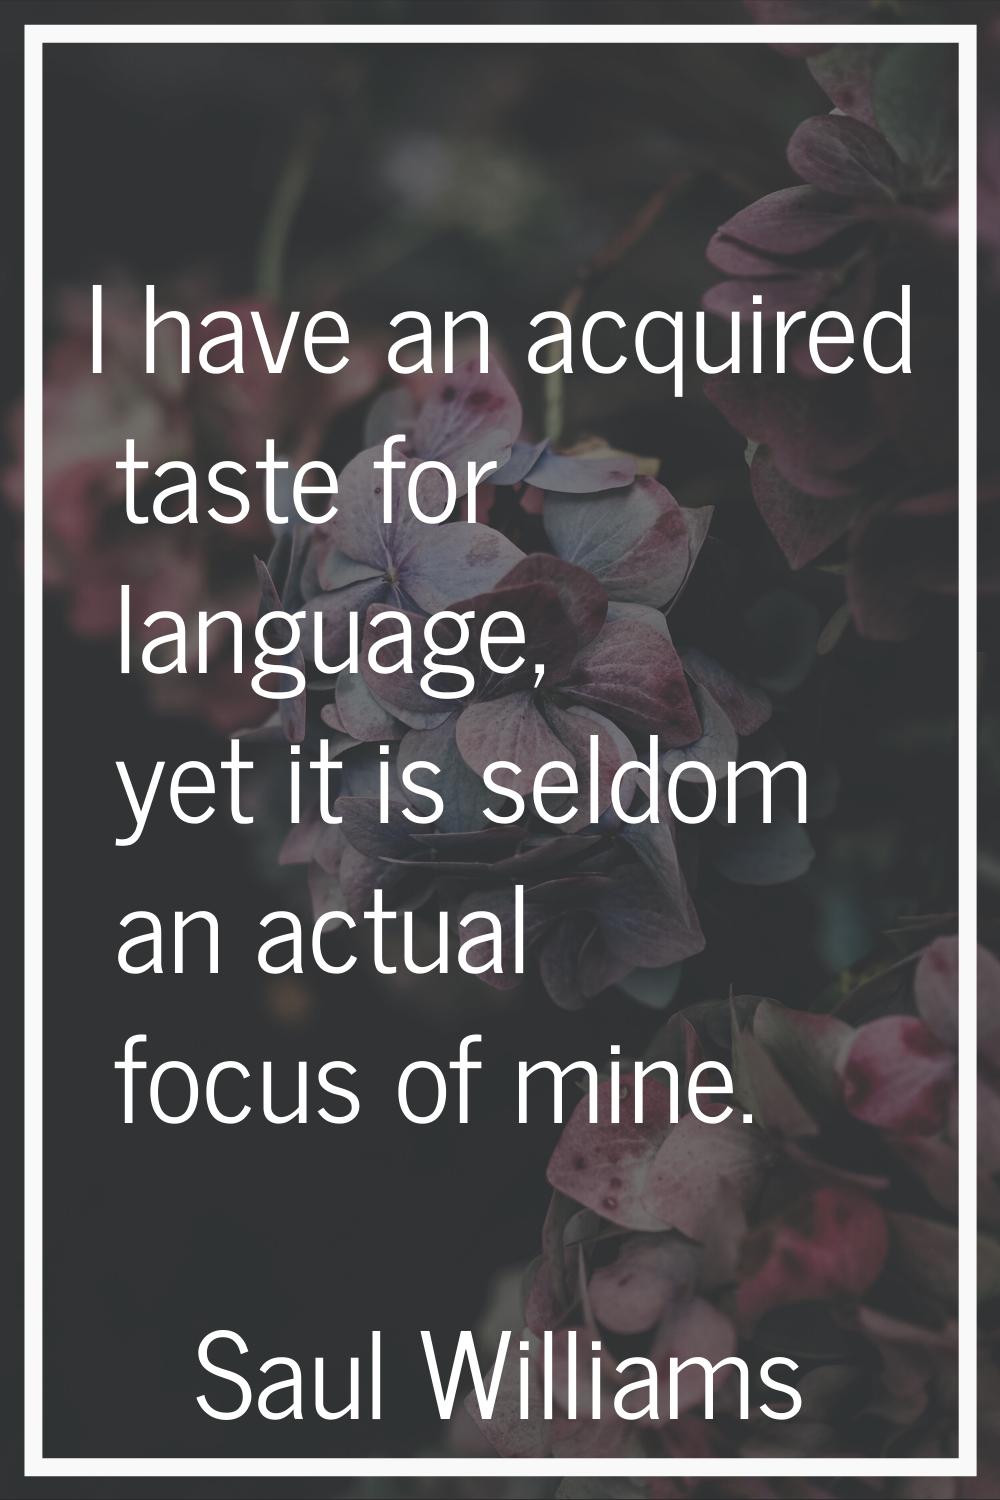 I have an acquired taste for language, yet it is seldom an actual focus of mine.